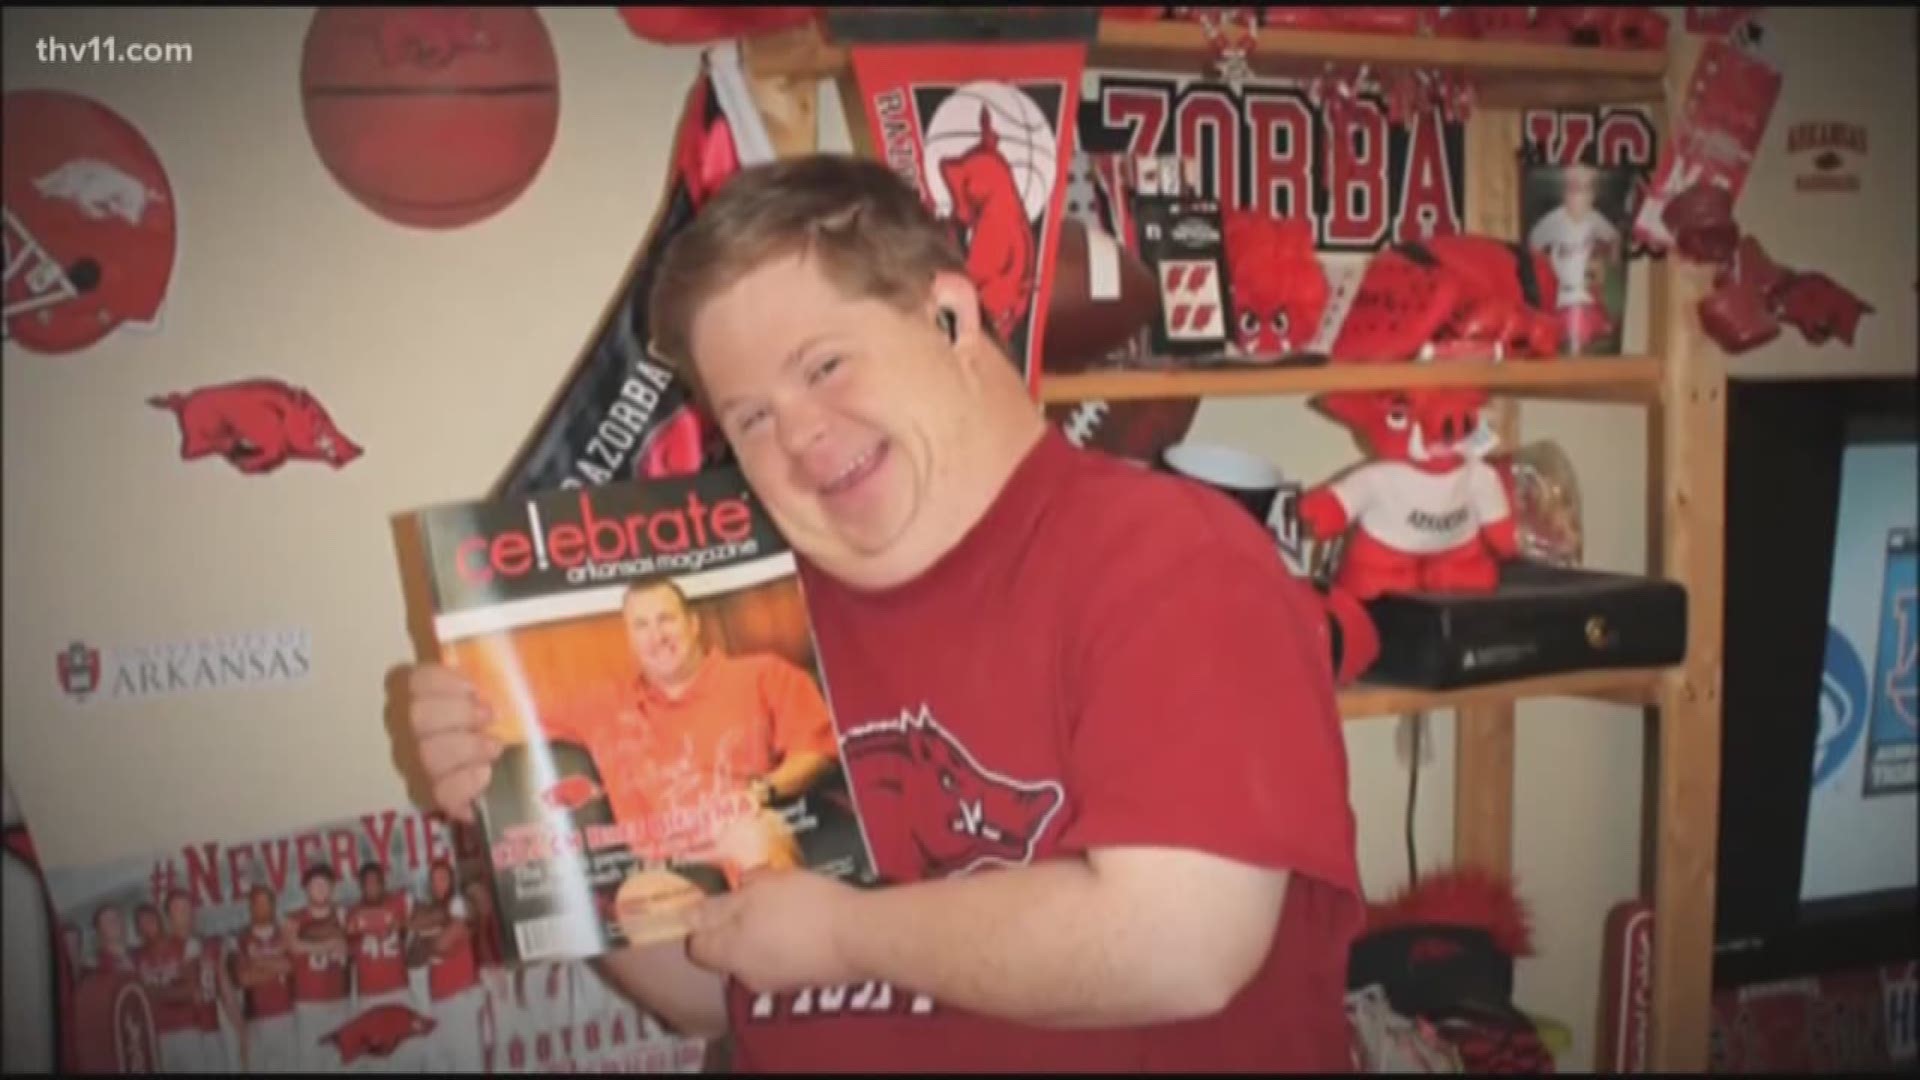 Razorback fans from far and wide lifting up thoughts and prayers tonight for hog super fan Canaan Sandy, who suffered a stroke today.